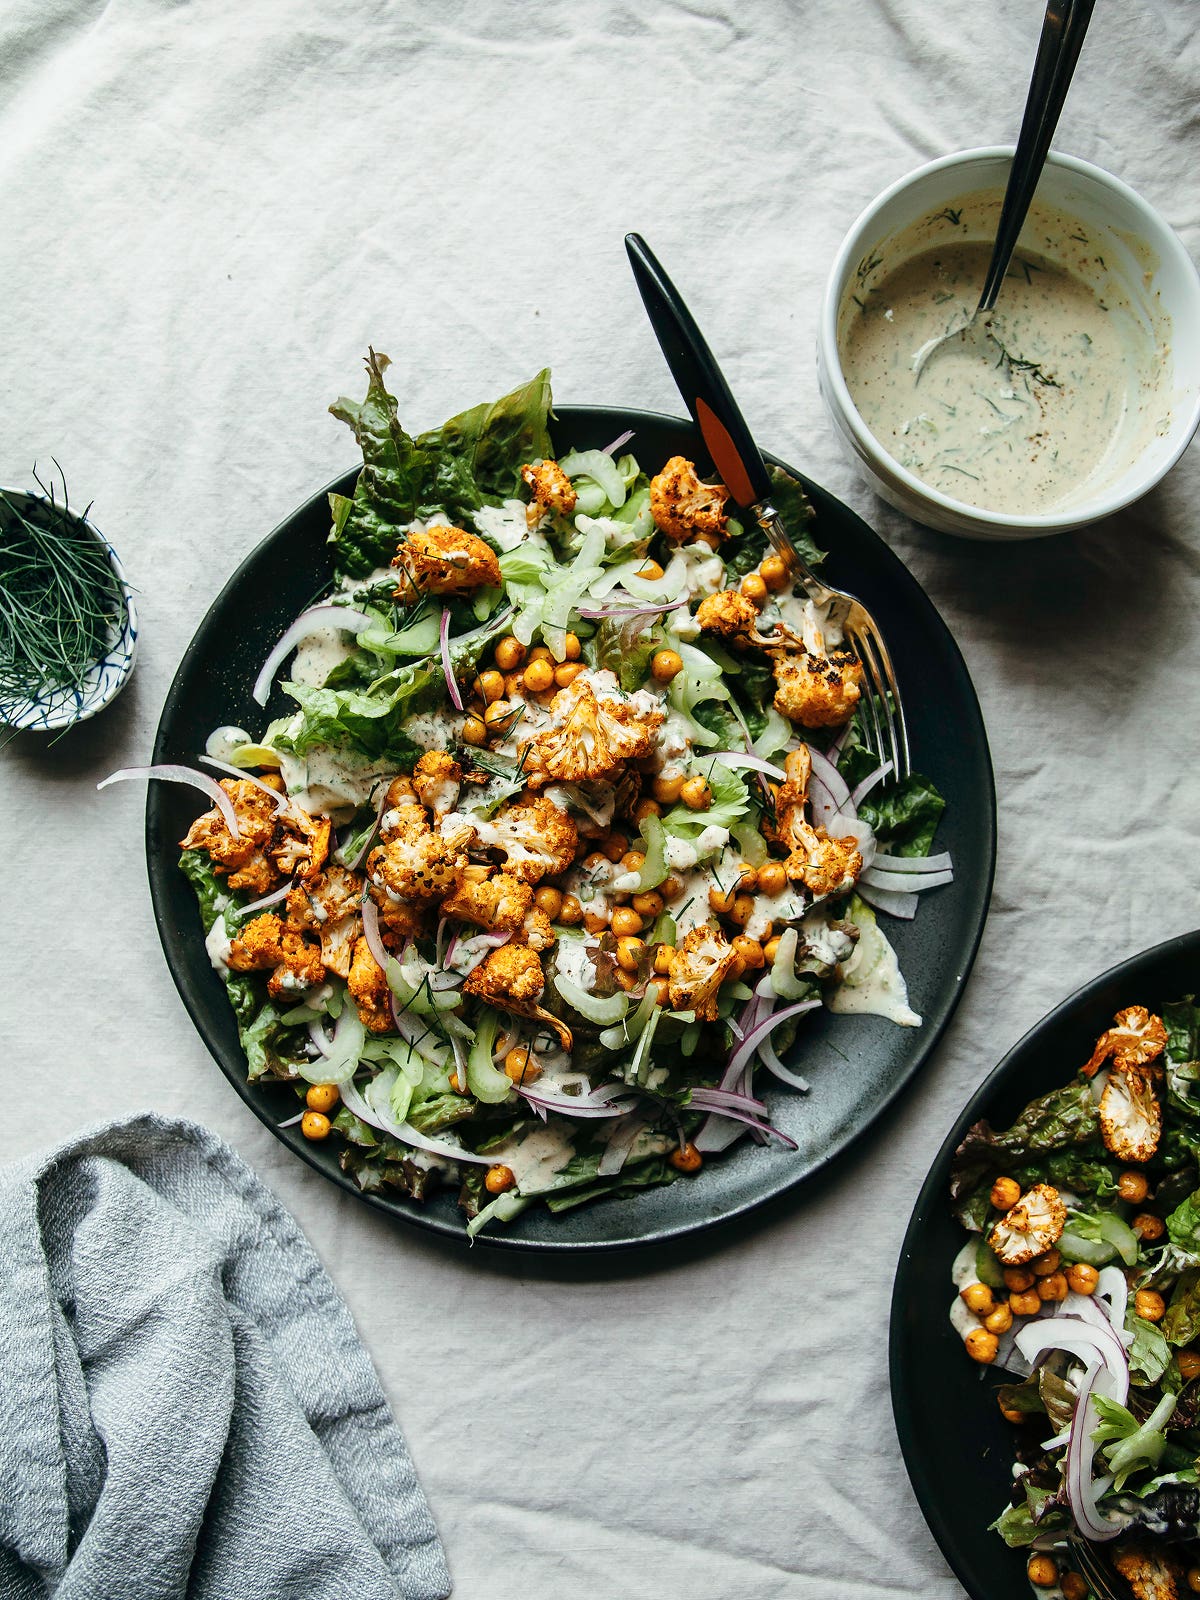 The Most Beautiful Grain Bowls We Saw on Pinterest